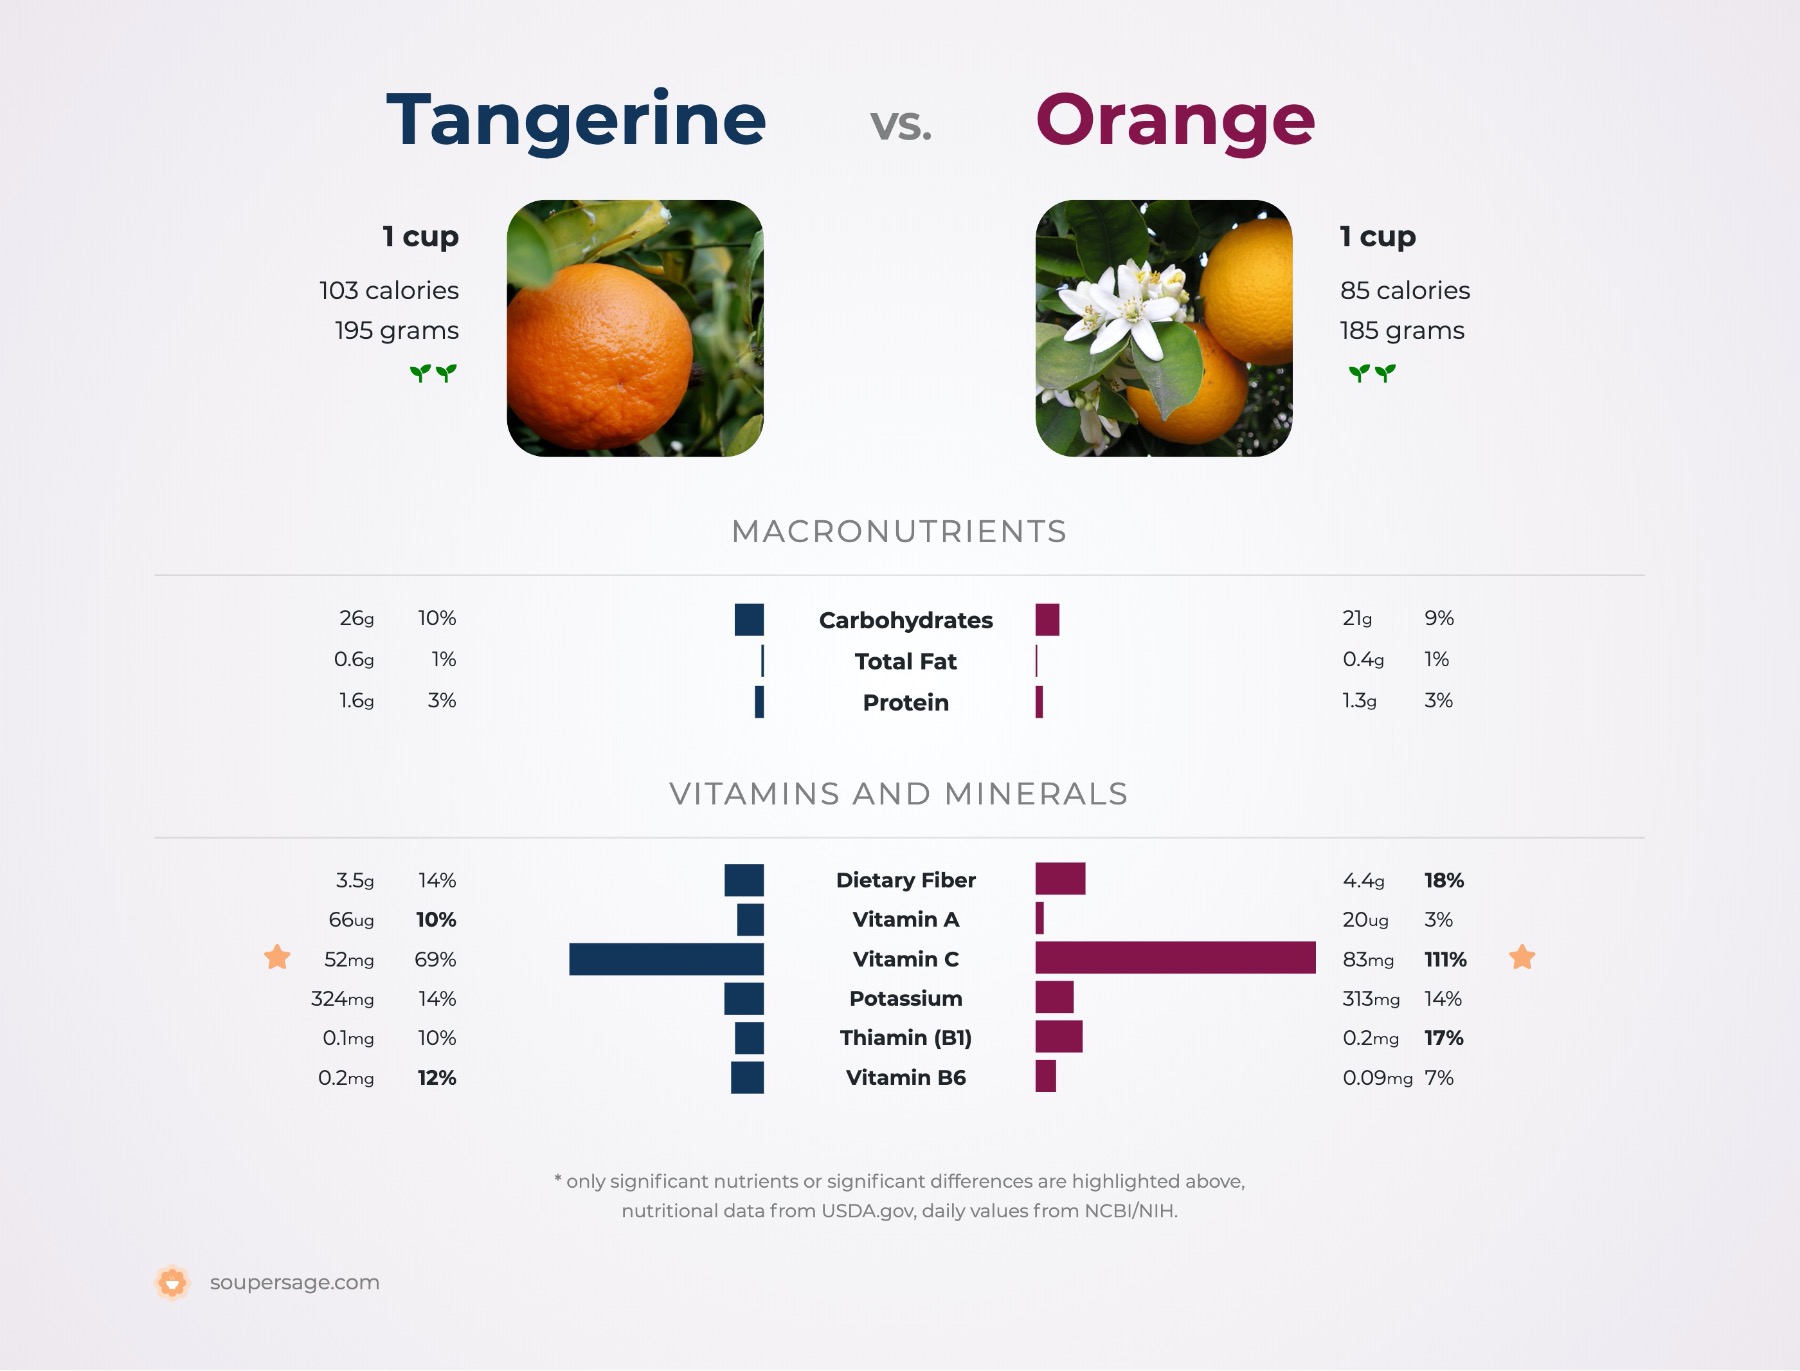 clementine vs tangerine difference